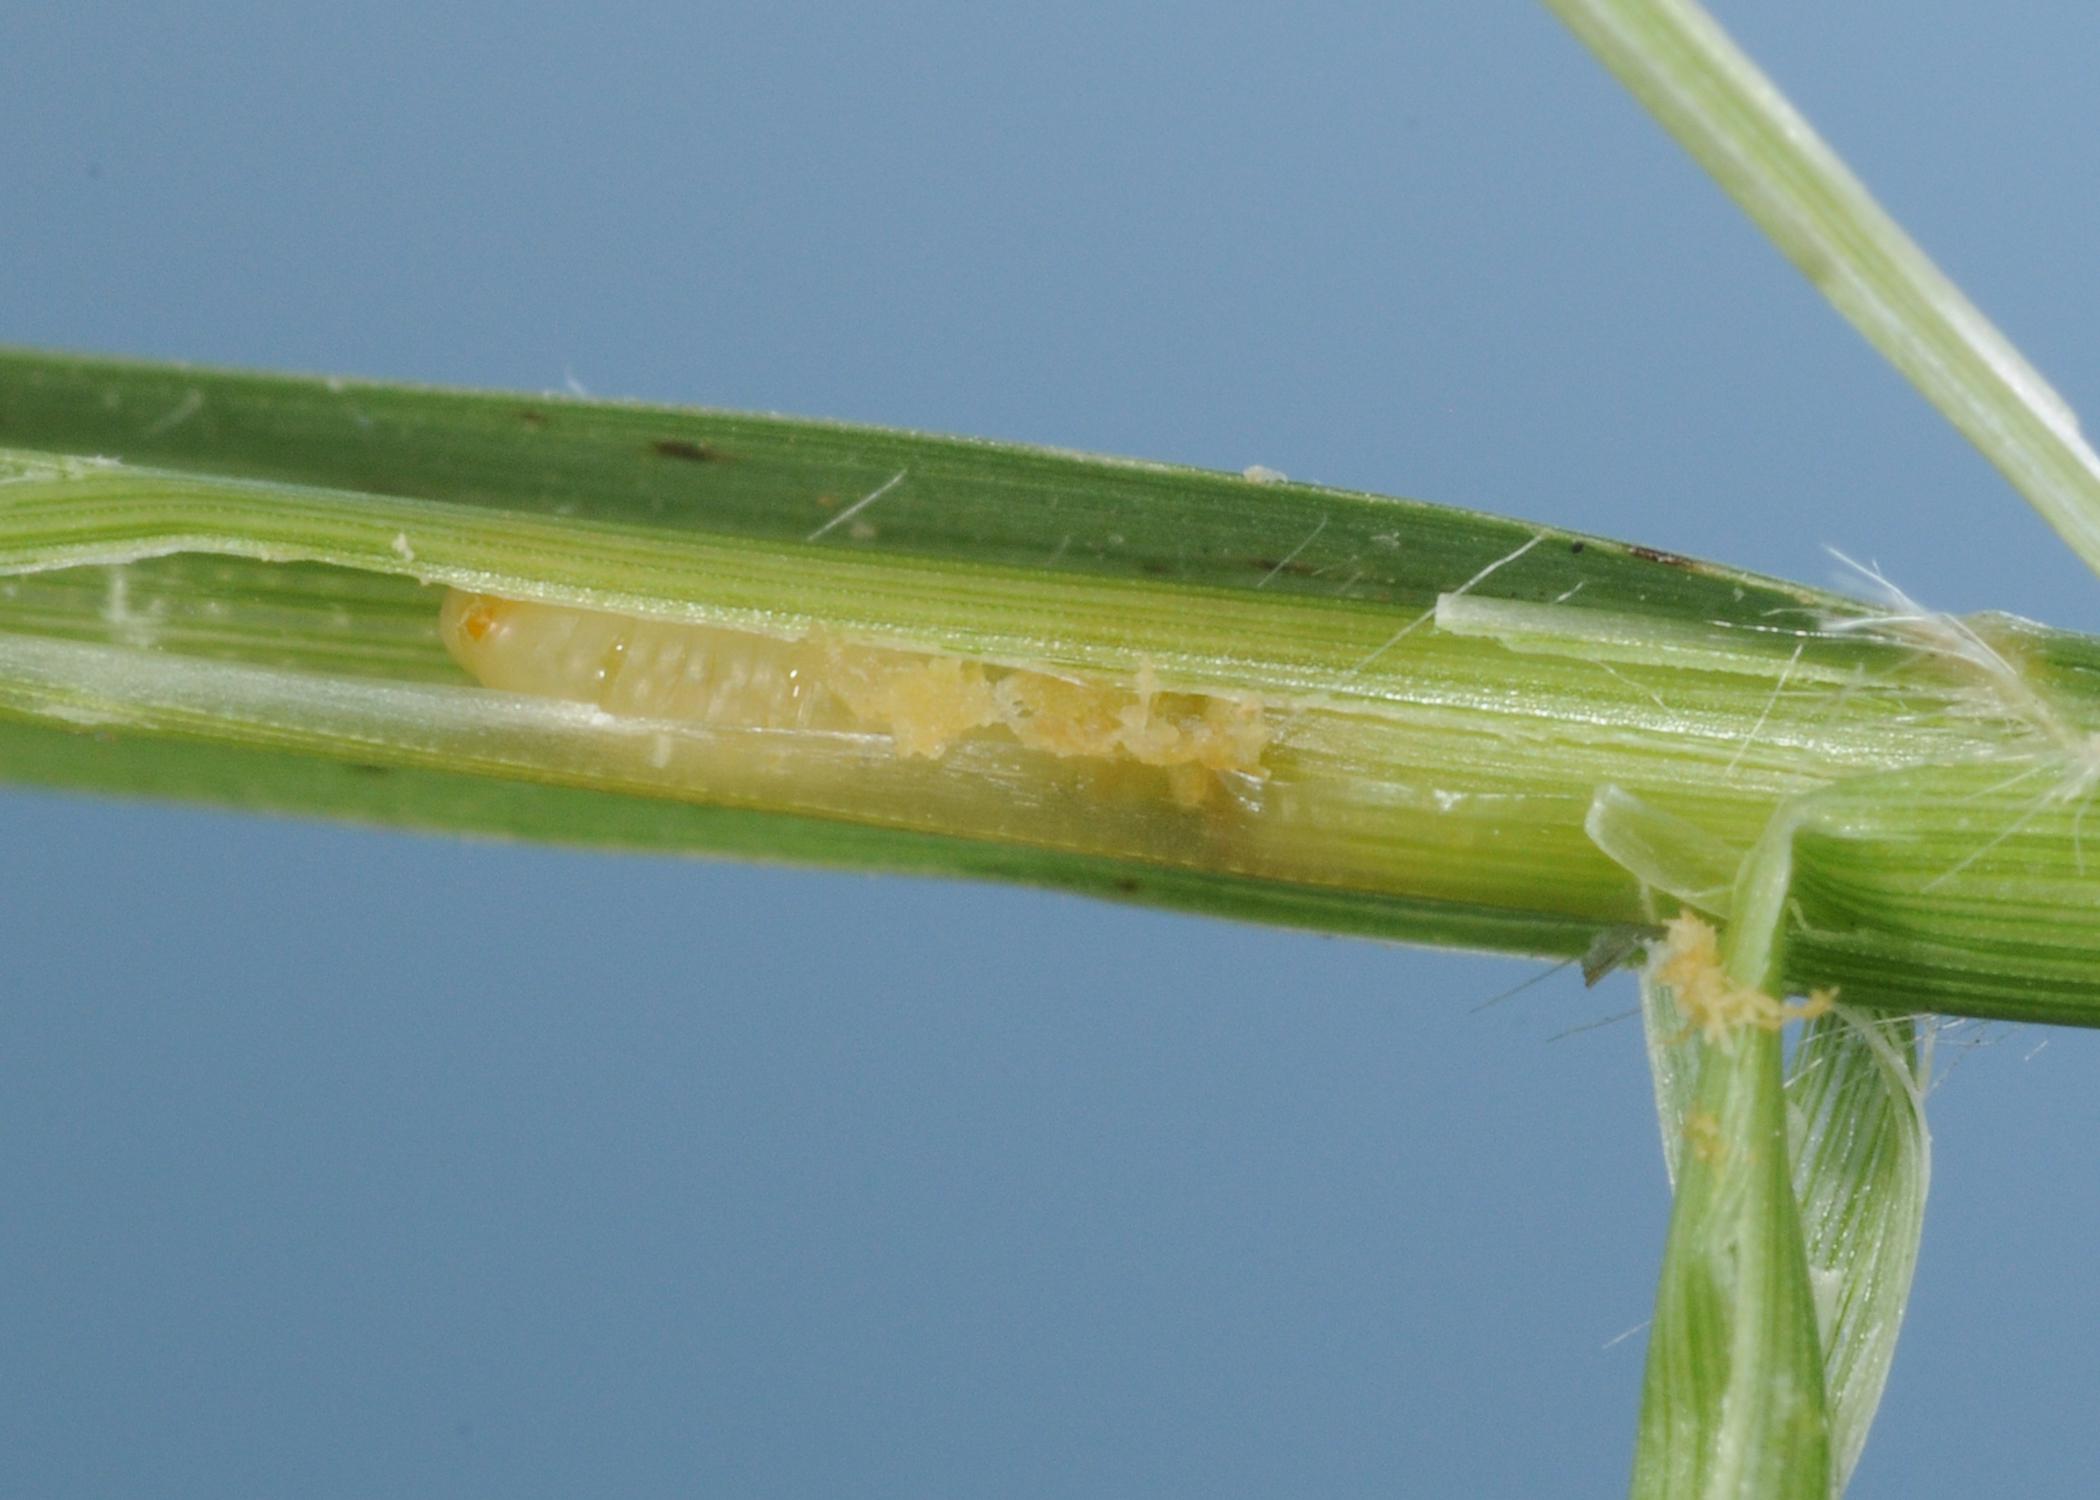 A white larva can be seen inside a peeled back grass stem.